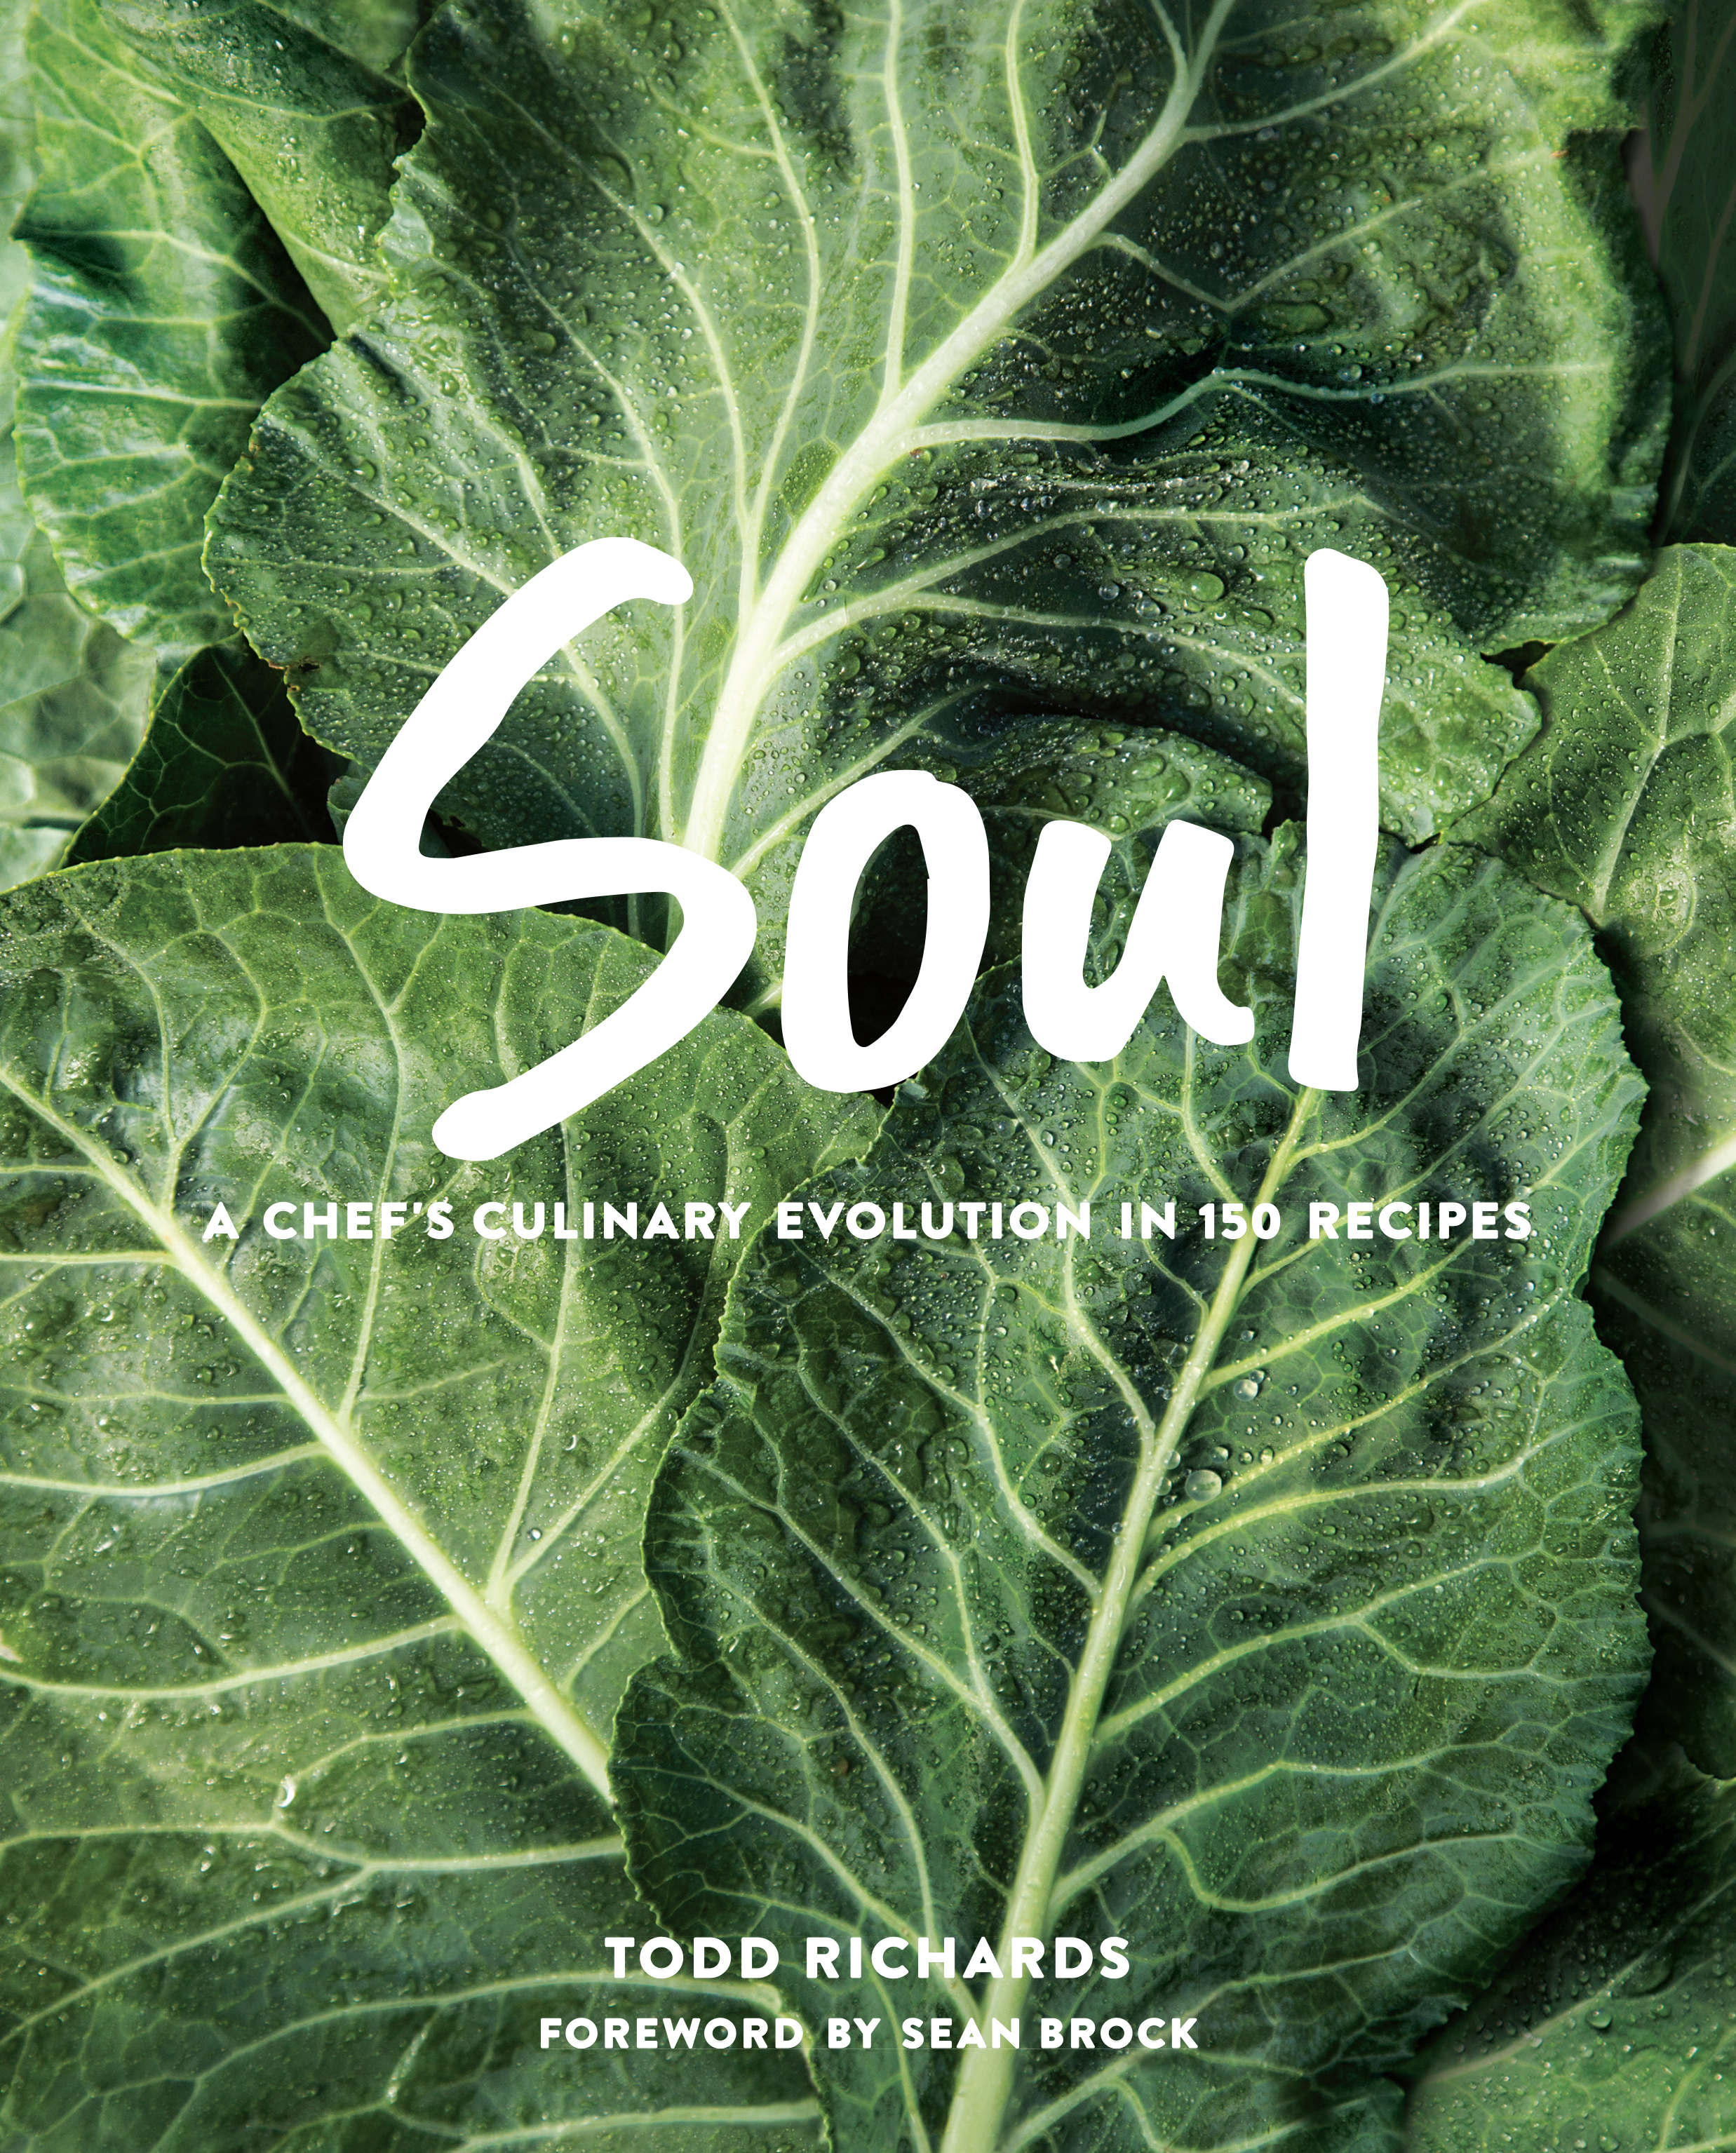 Cookbook cover for SOUL: A Chef's Culinary Evolution in 150 Recipes